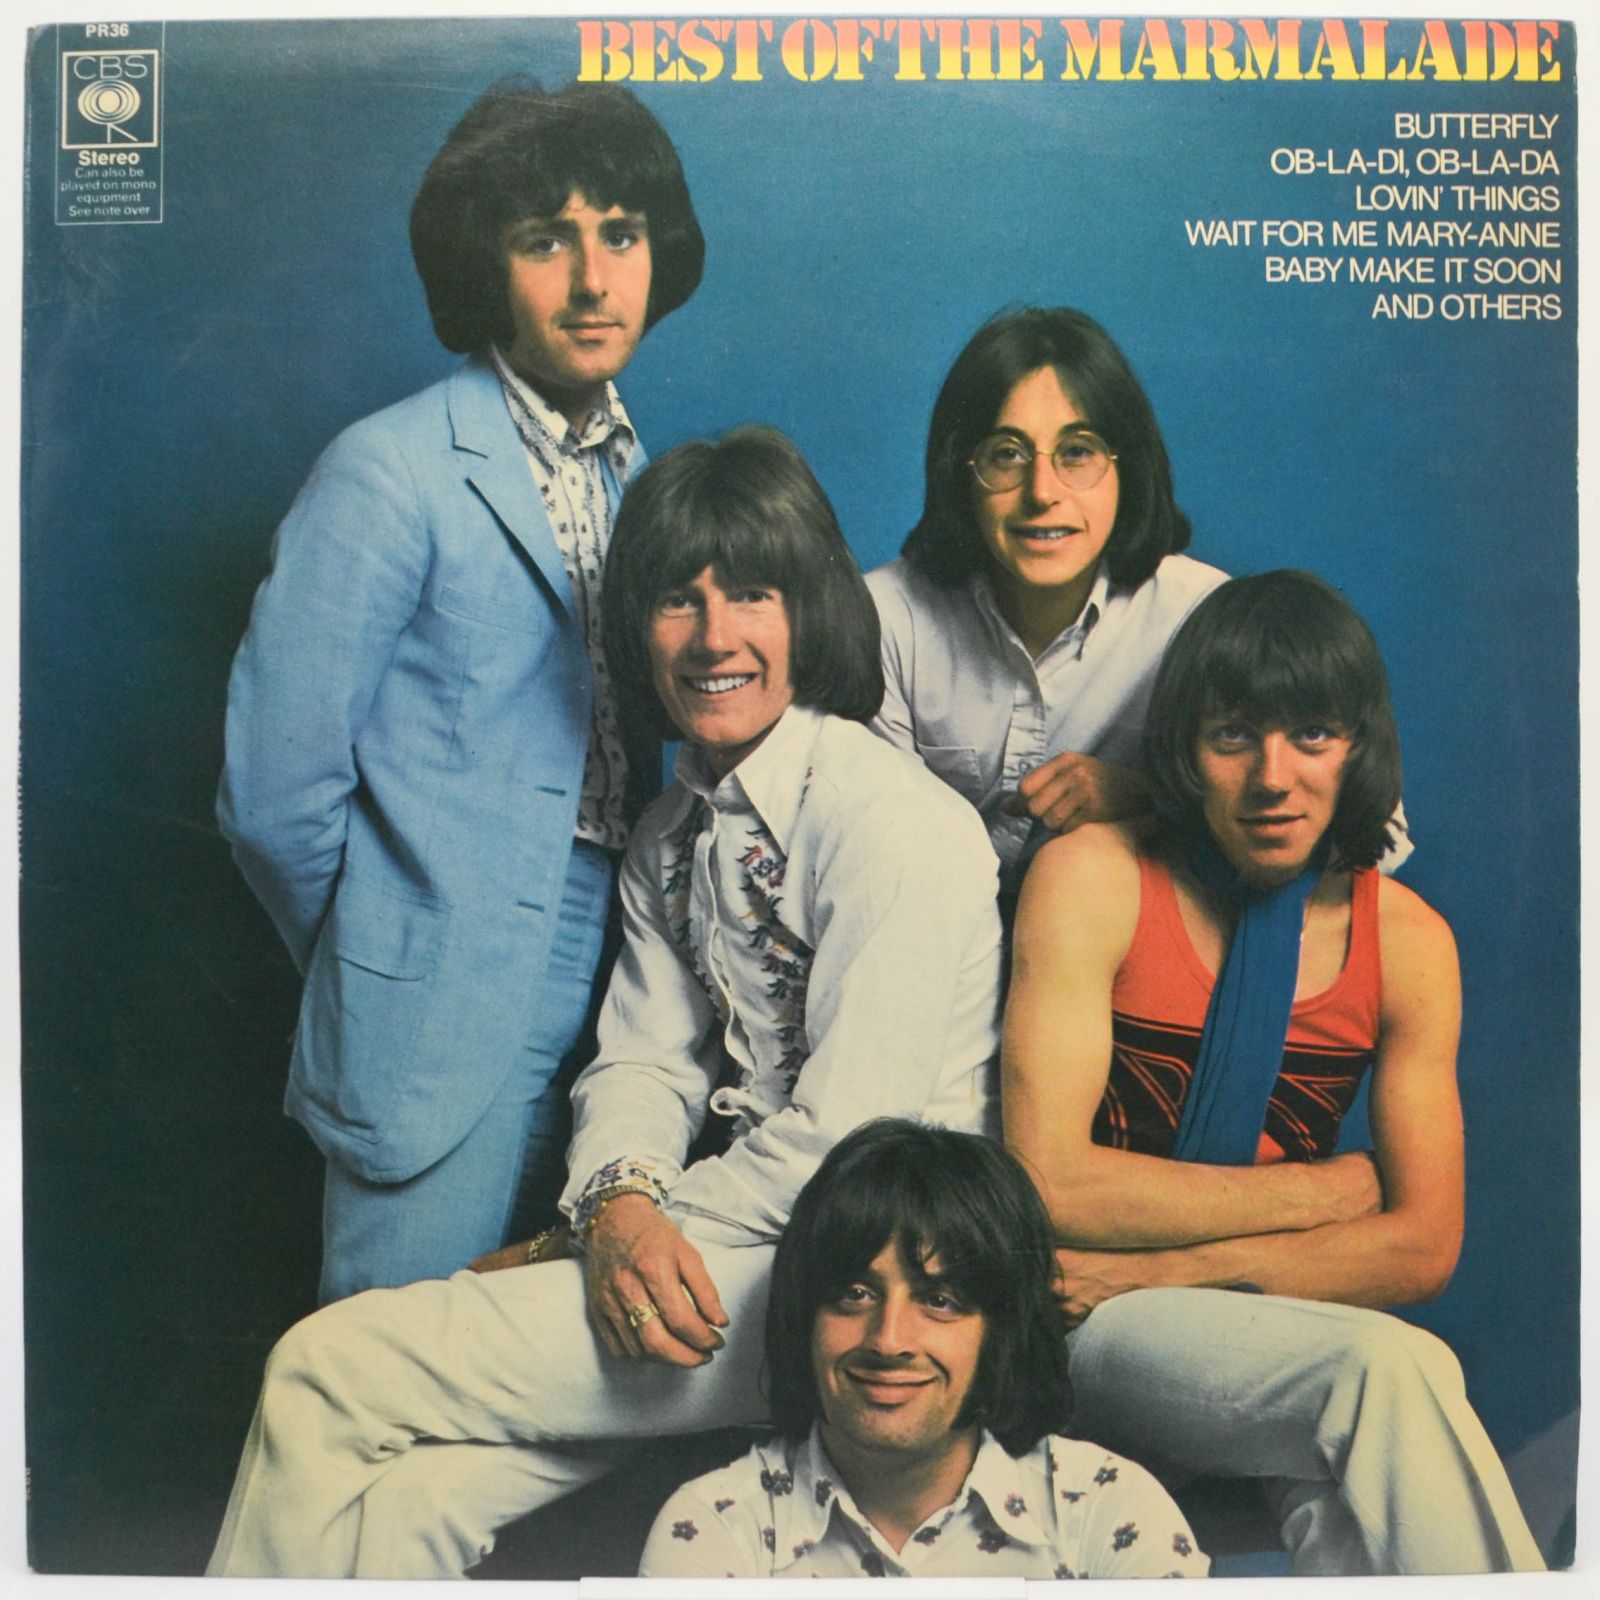 Marmalade — The Best Of The Marmalade, 1970